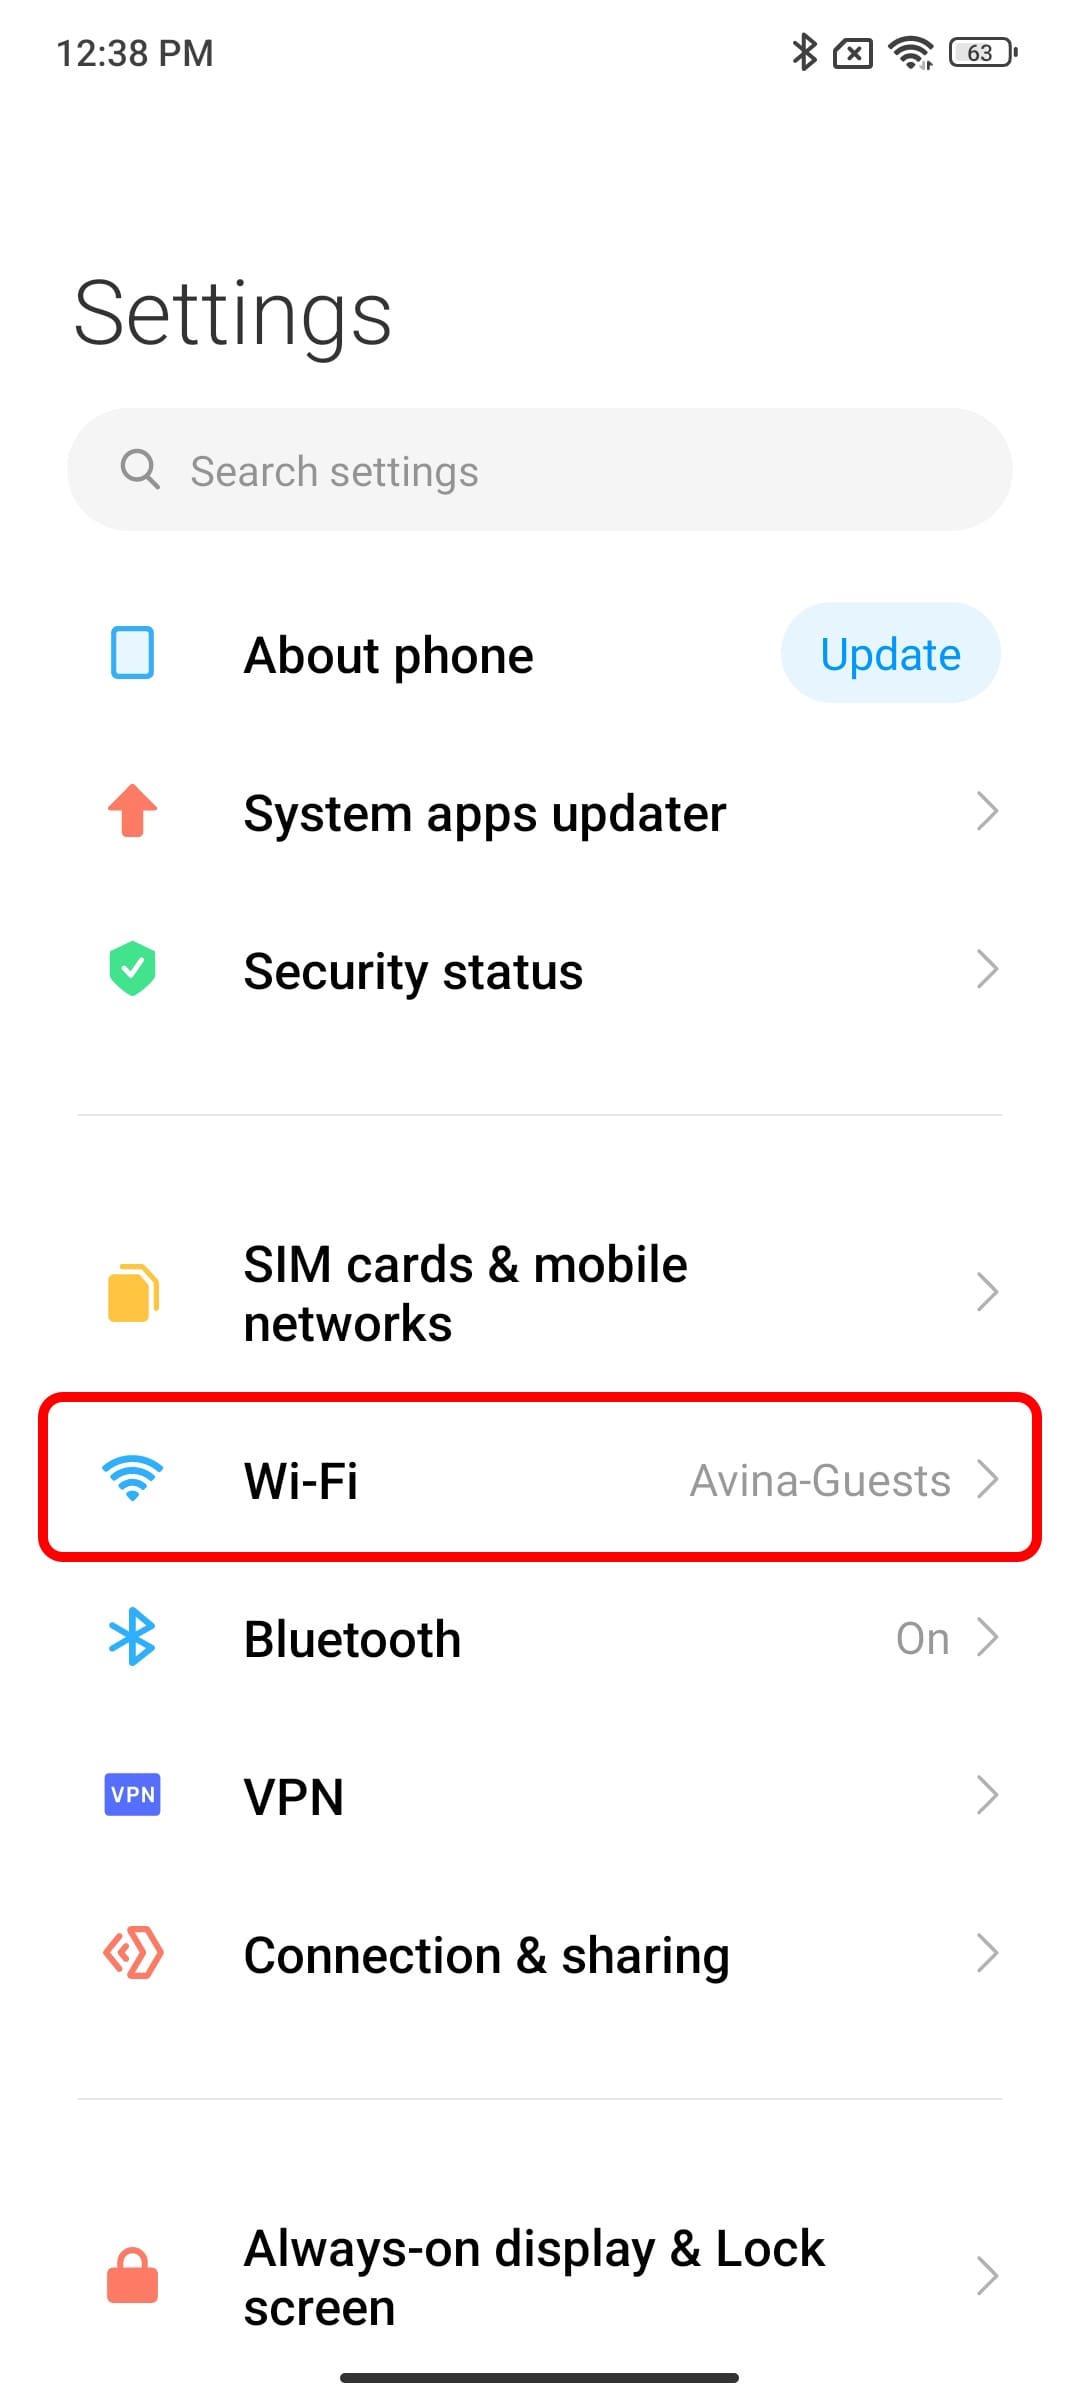 The first step is to find the Wi-Fi password on the Xiaomi phone